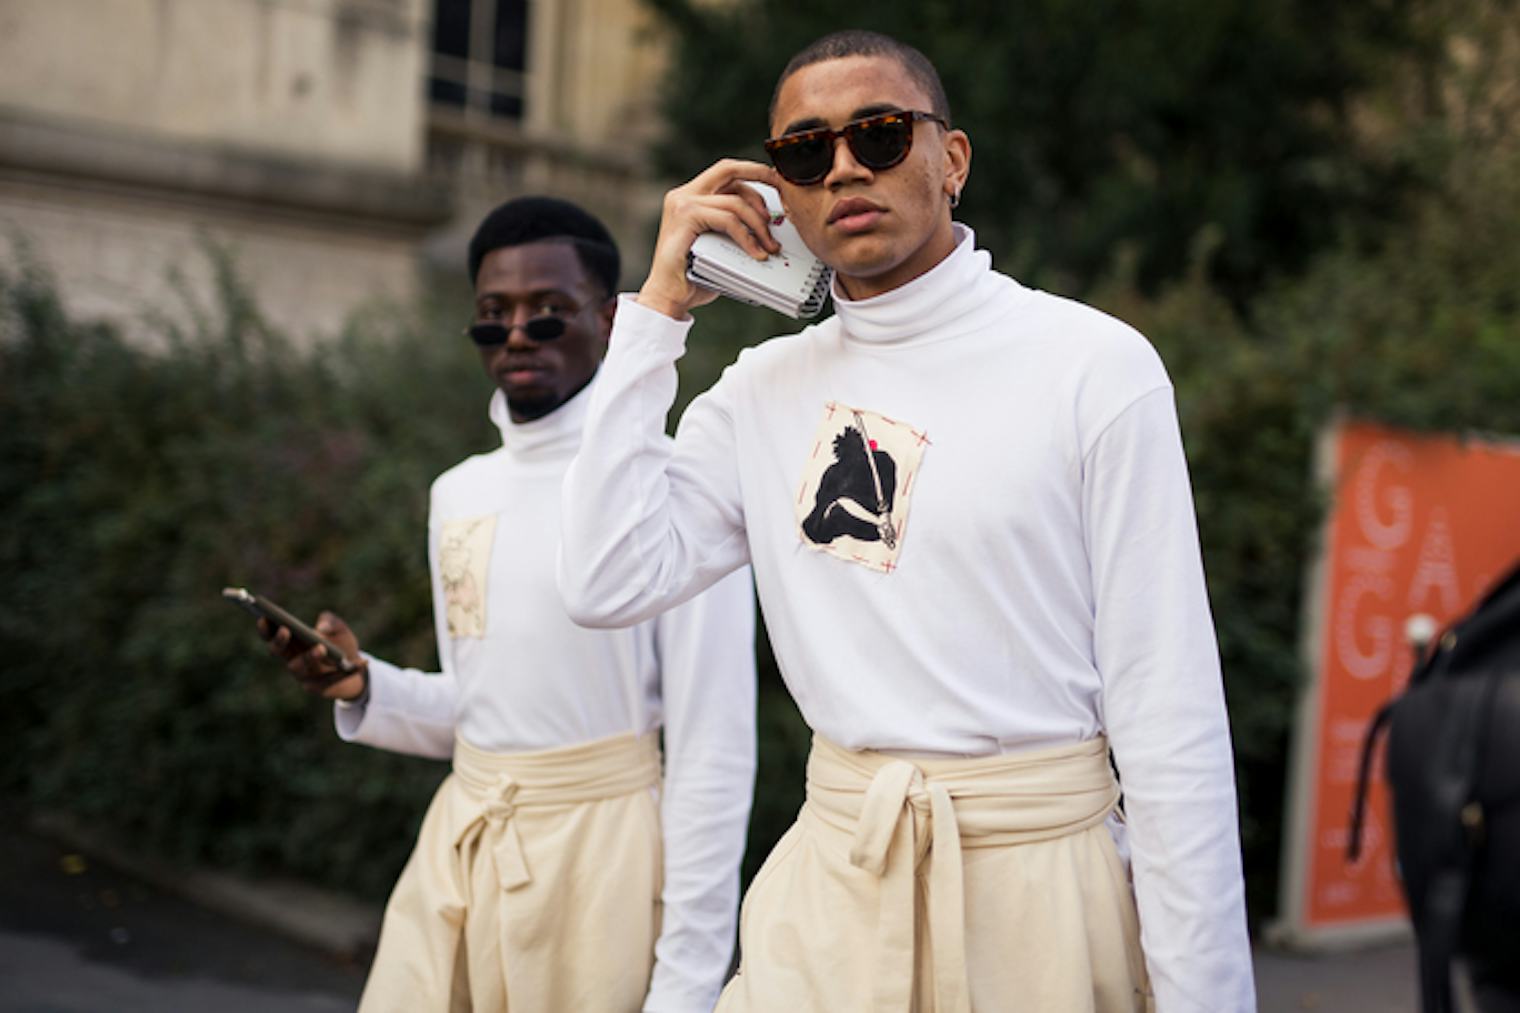 PFW Street Style Day 4: Graphic Content Ahead